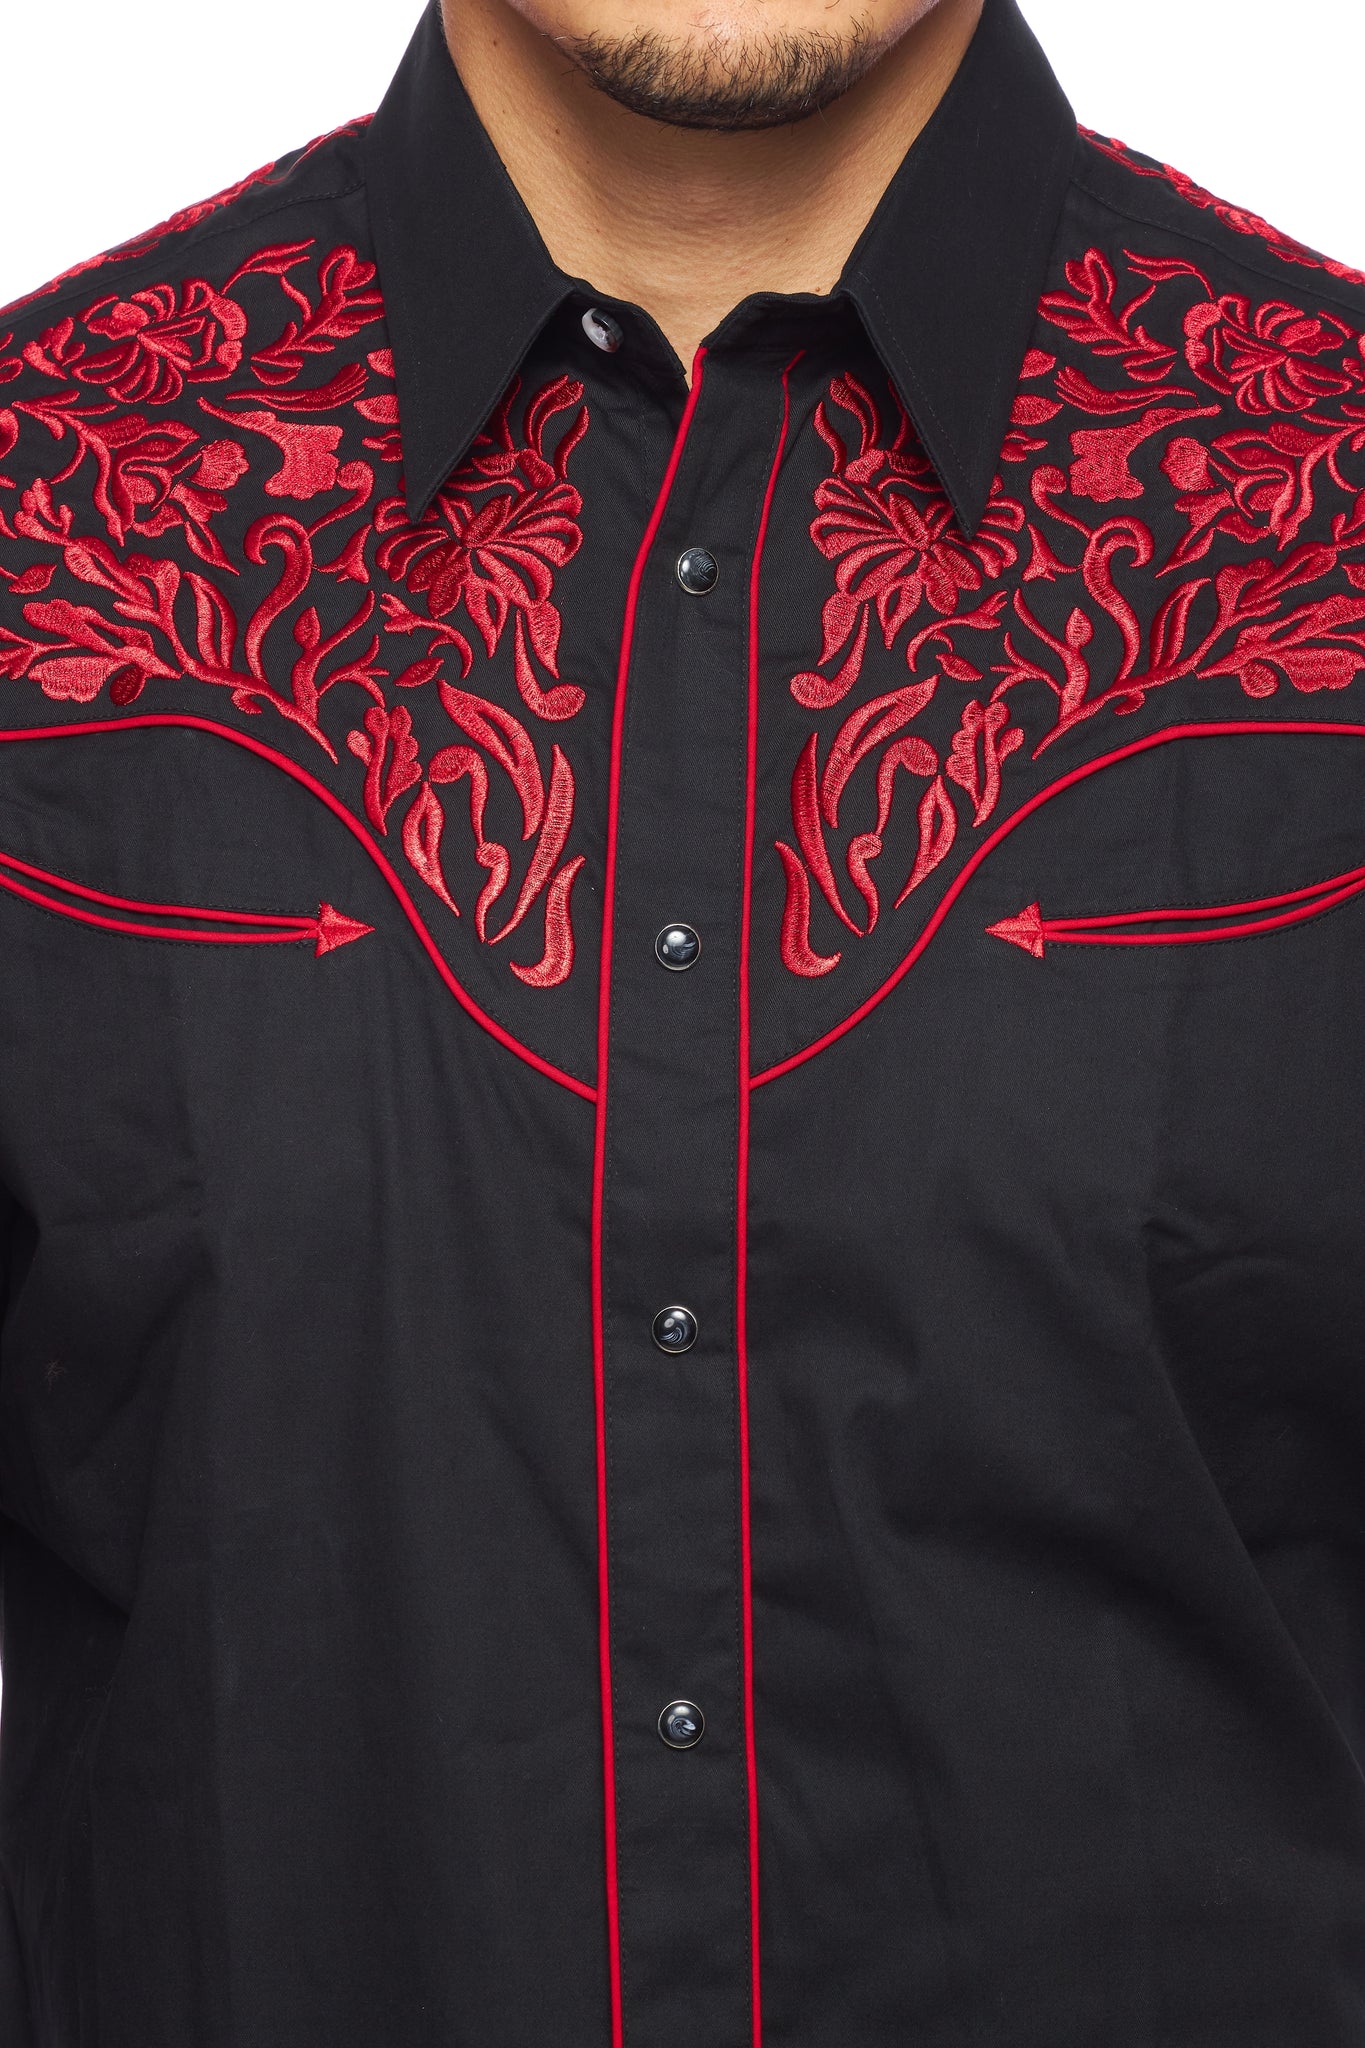 Men's Western Cowboy Embroidery Shirt -PS500L-564